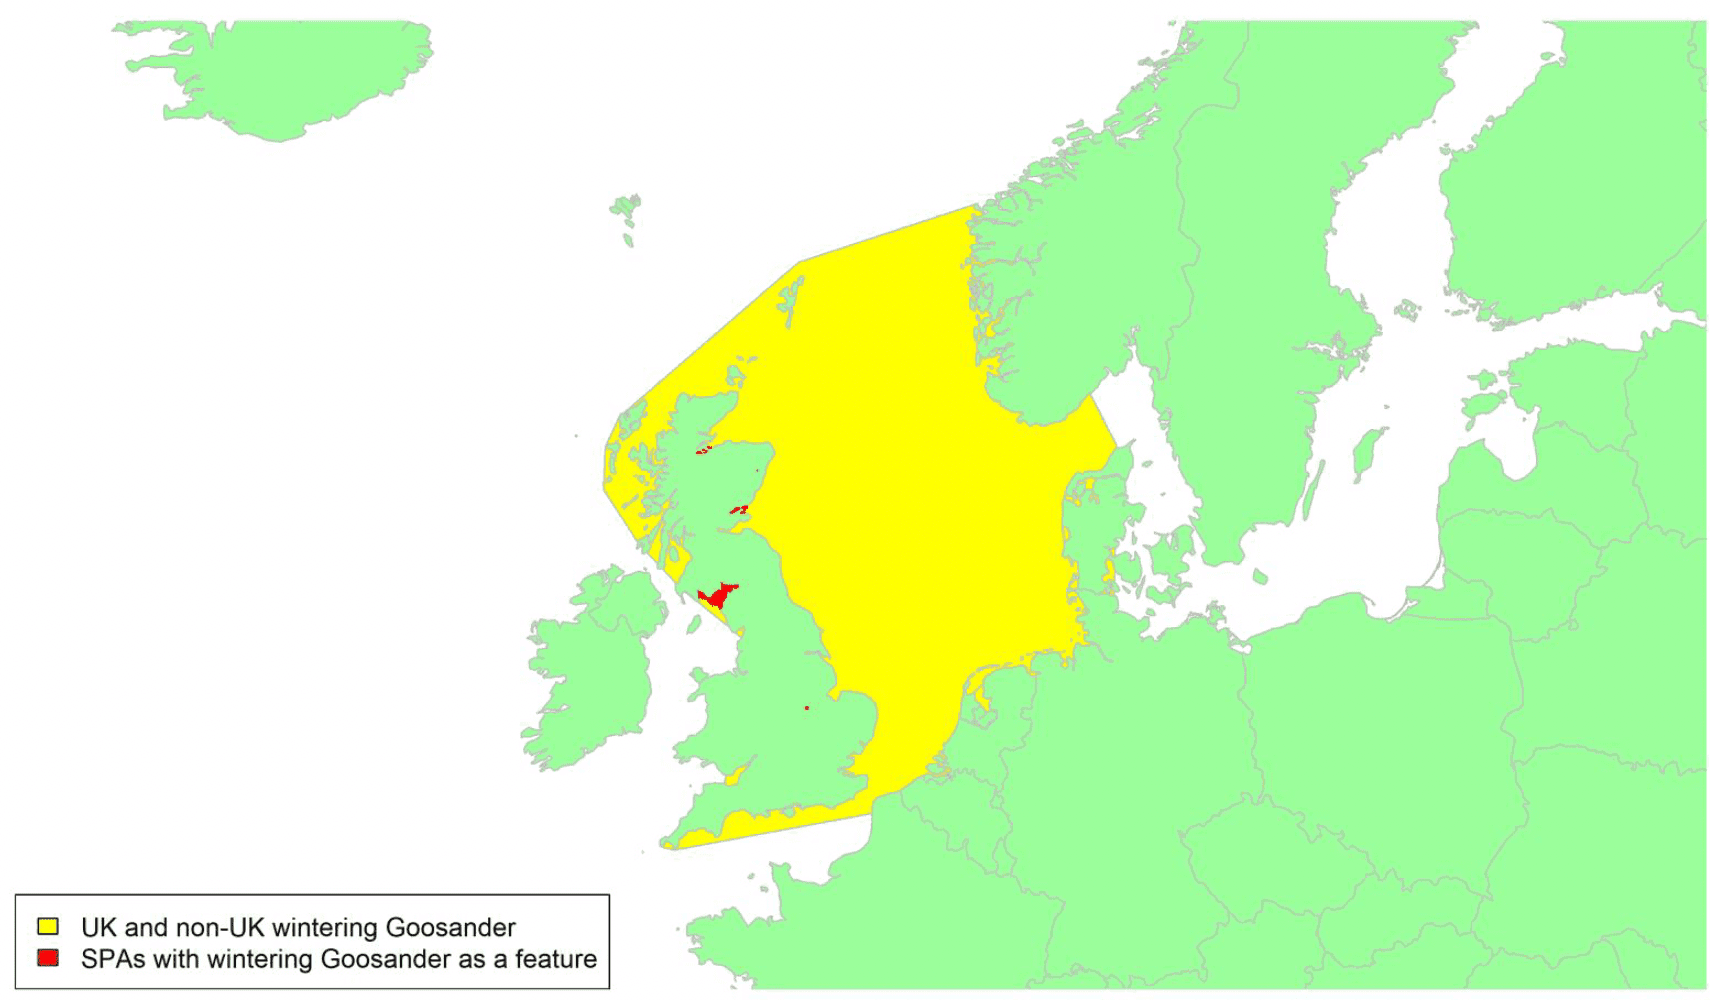 Map of North West Europe showing migratory routes and SPAs within the UK for Goosander as described in the text below.